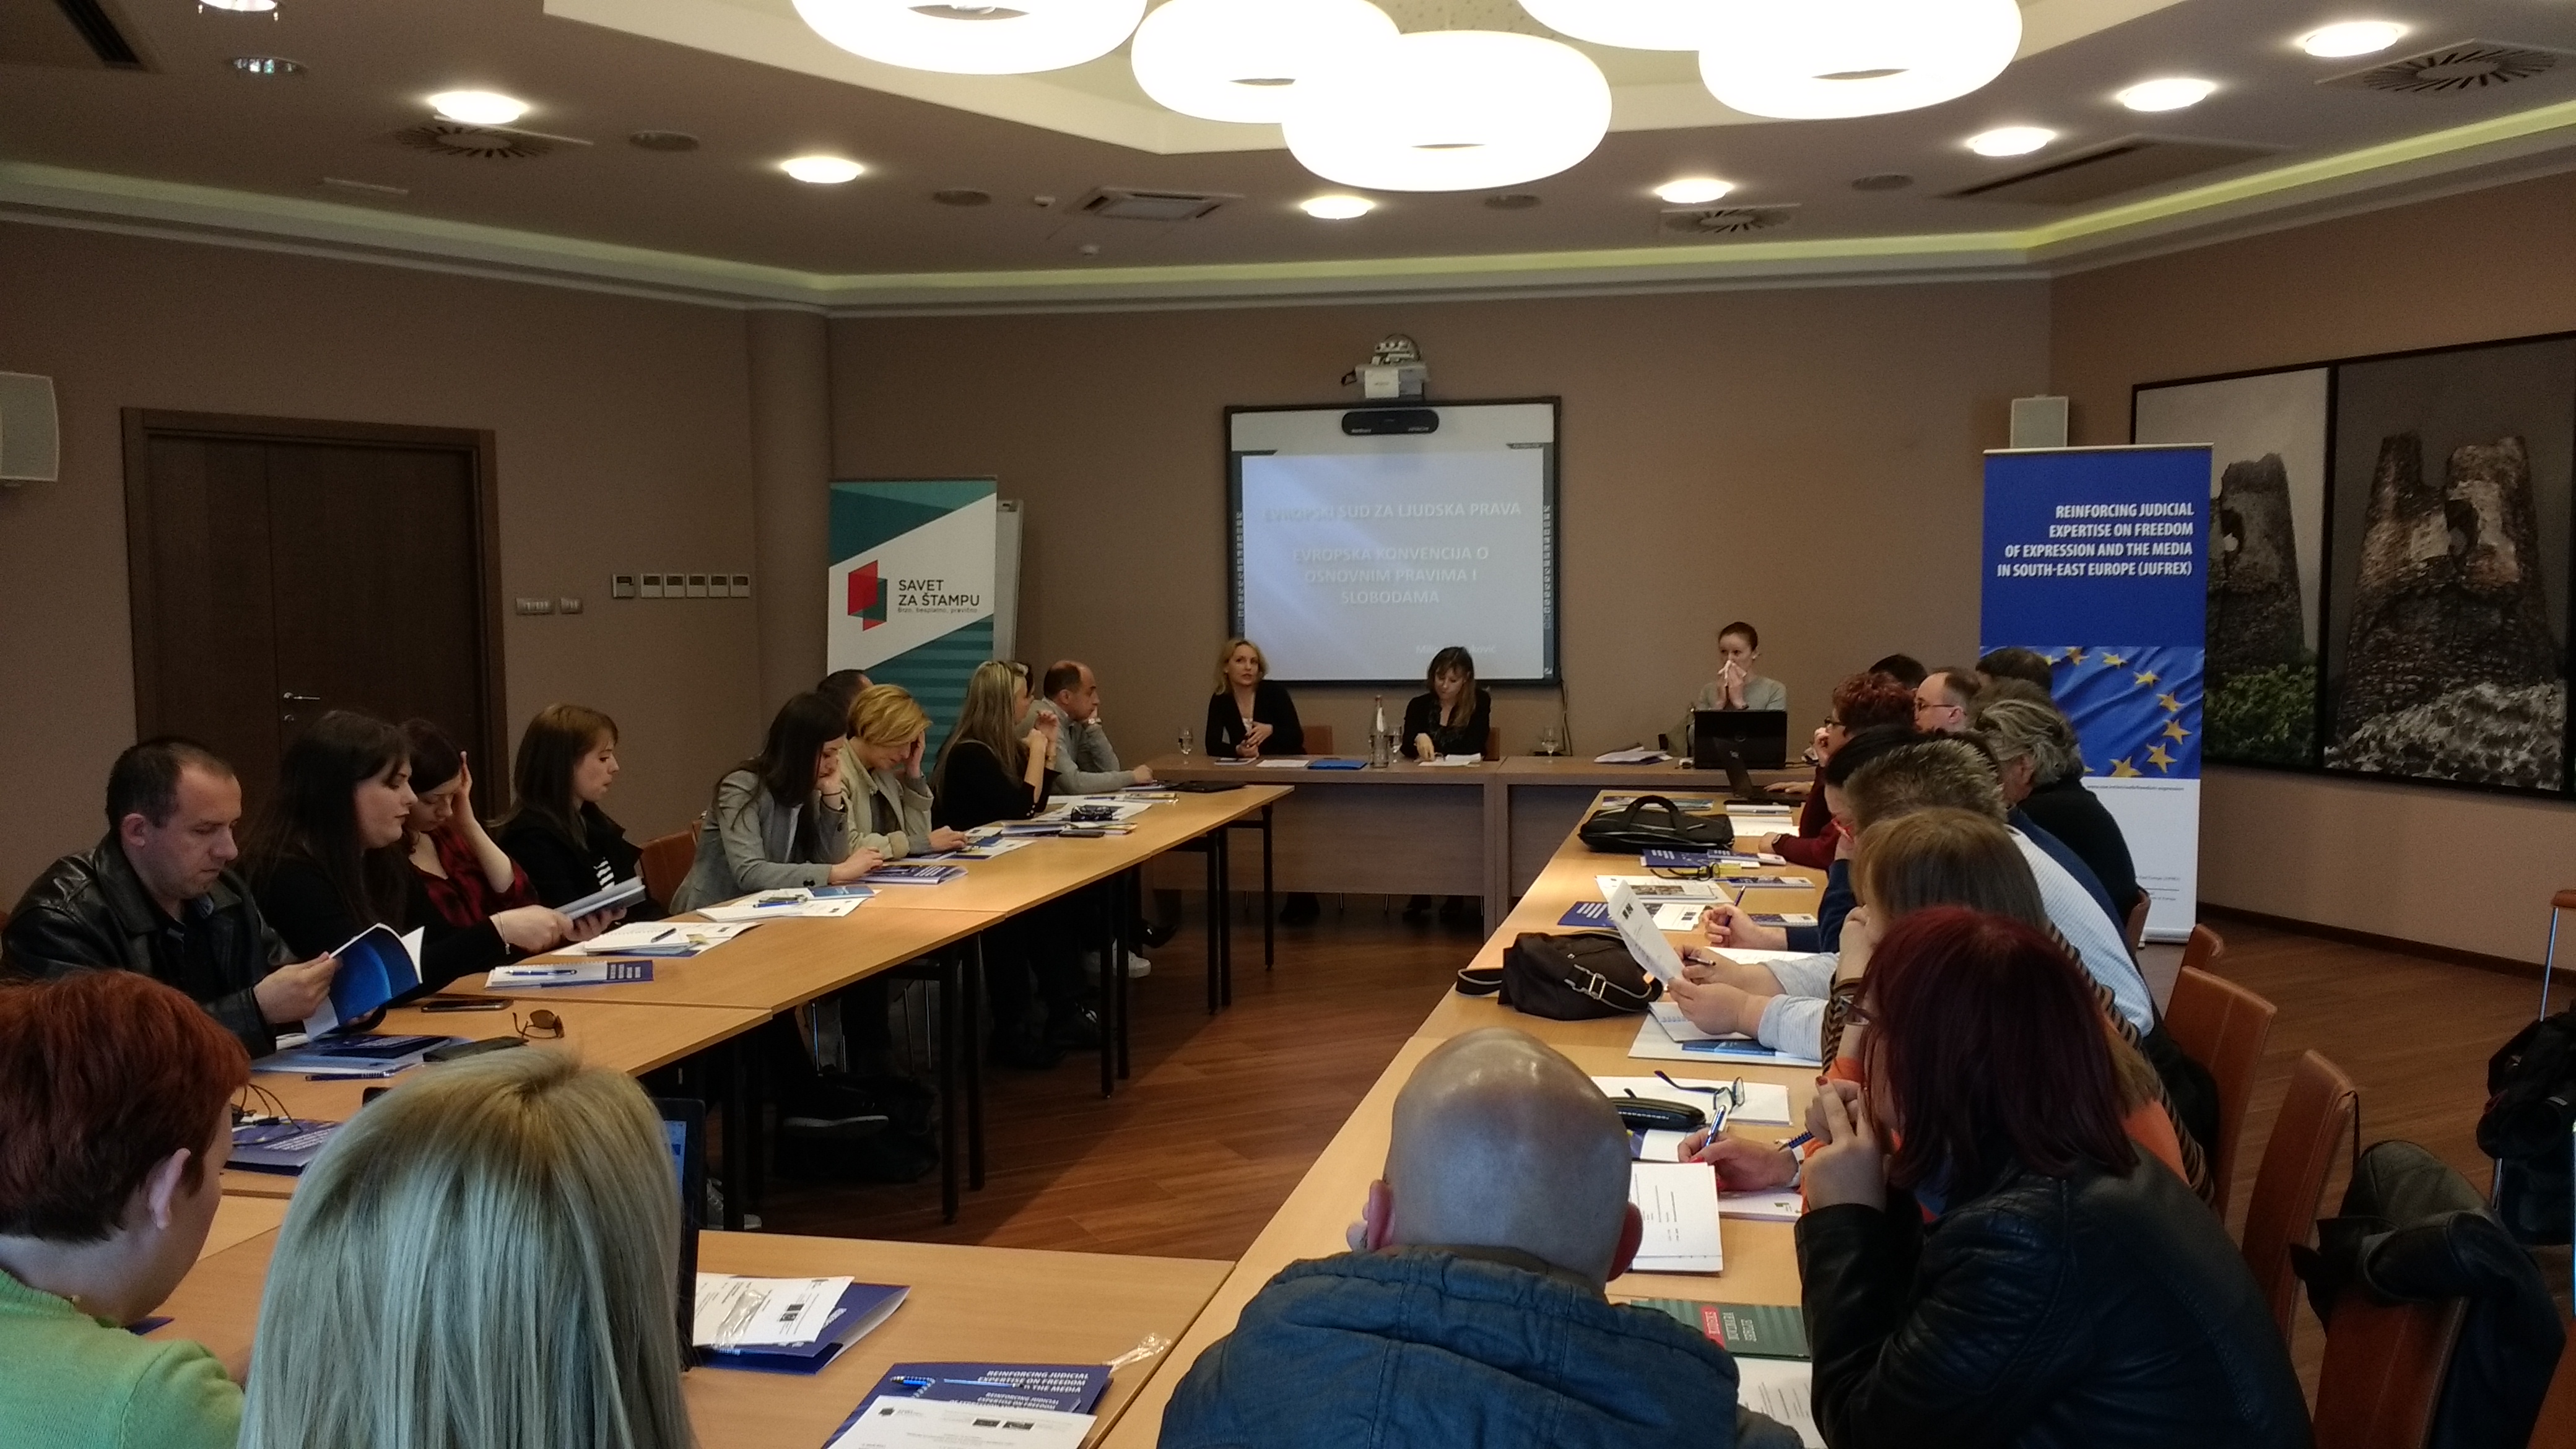 Training of journalists on Freedom of Expression, Right to Privacy and Media Ethics